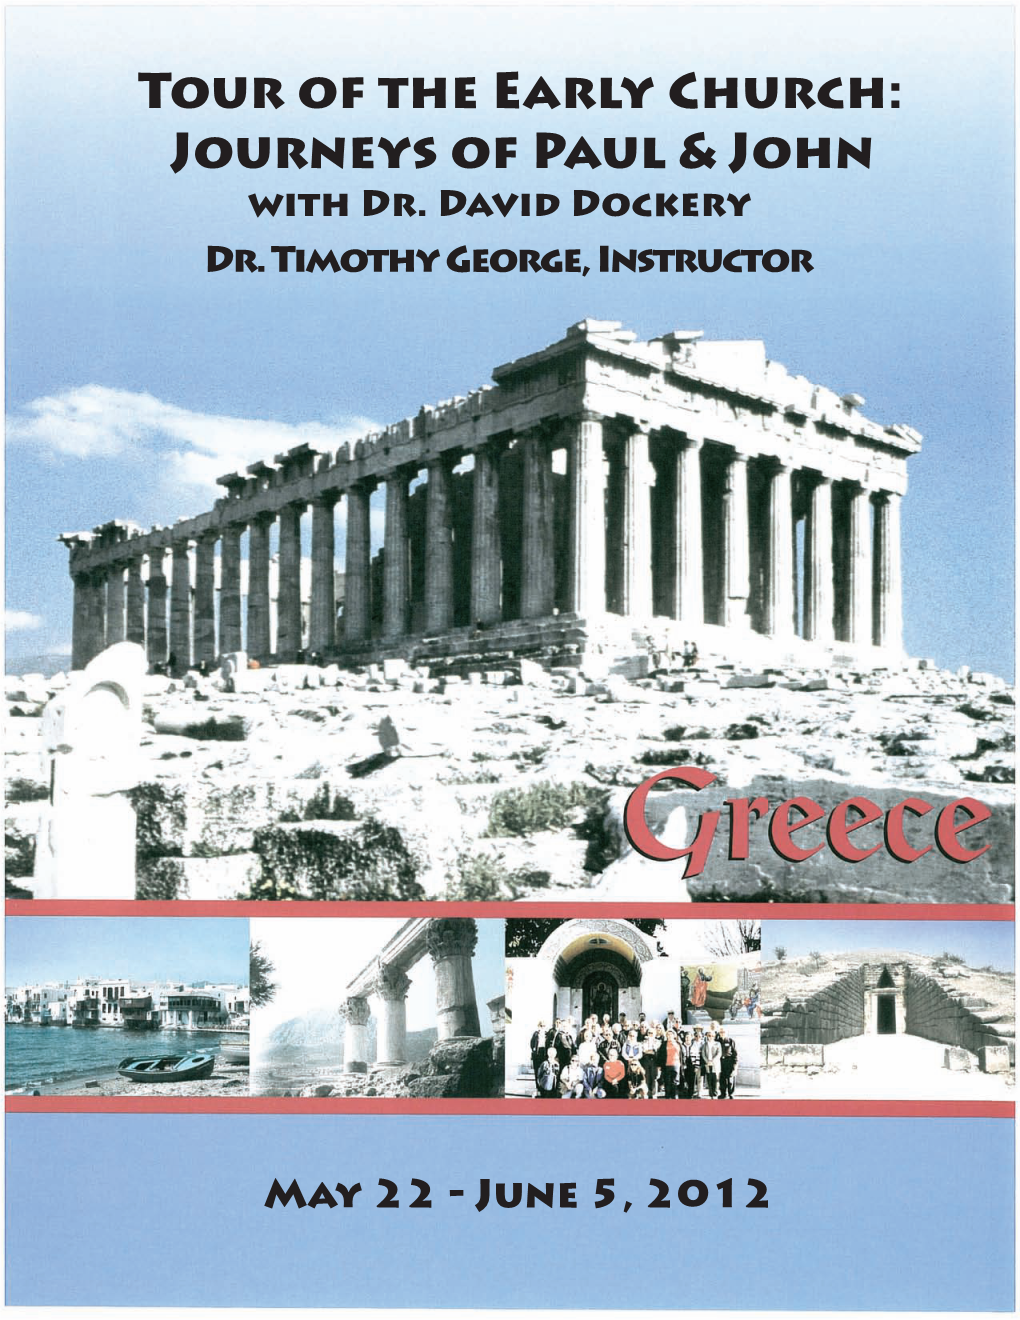 Tour of the Early Church: Journeys of Paul & John with Dr